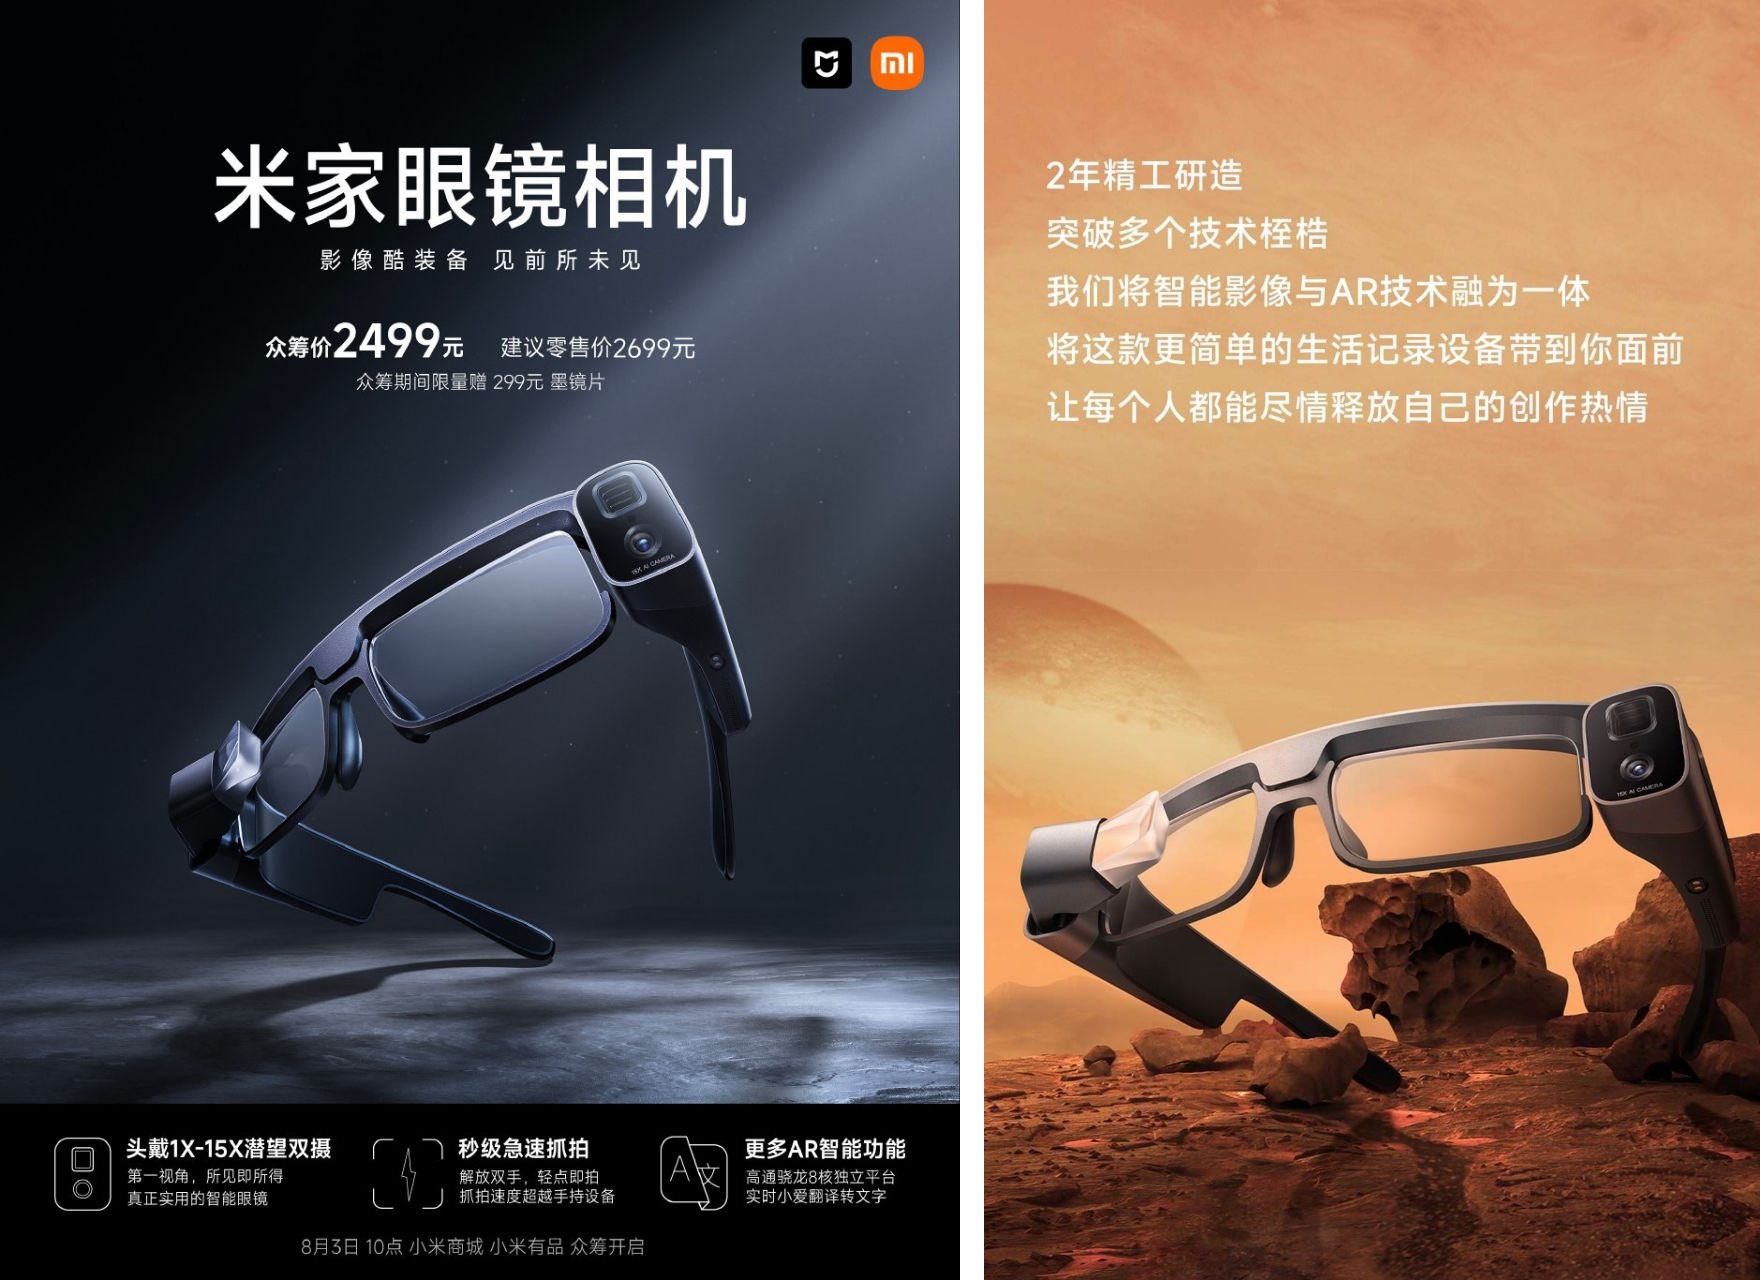 Xiaomi introduced smart glasses with 50 MP camera and Sony Micro OLED screen for $400